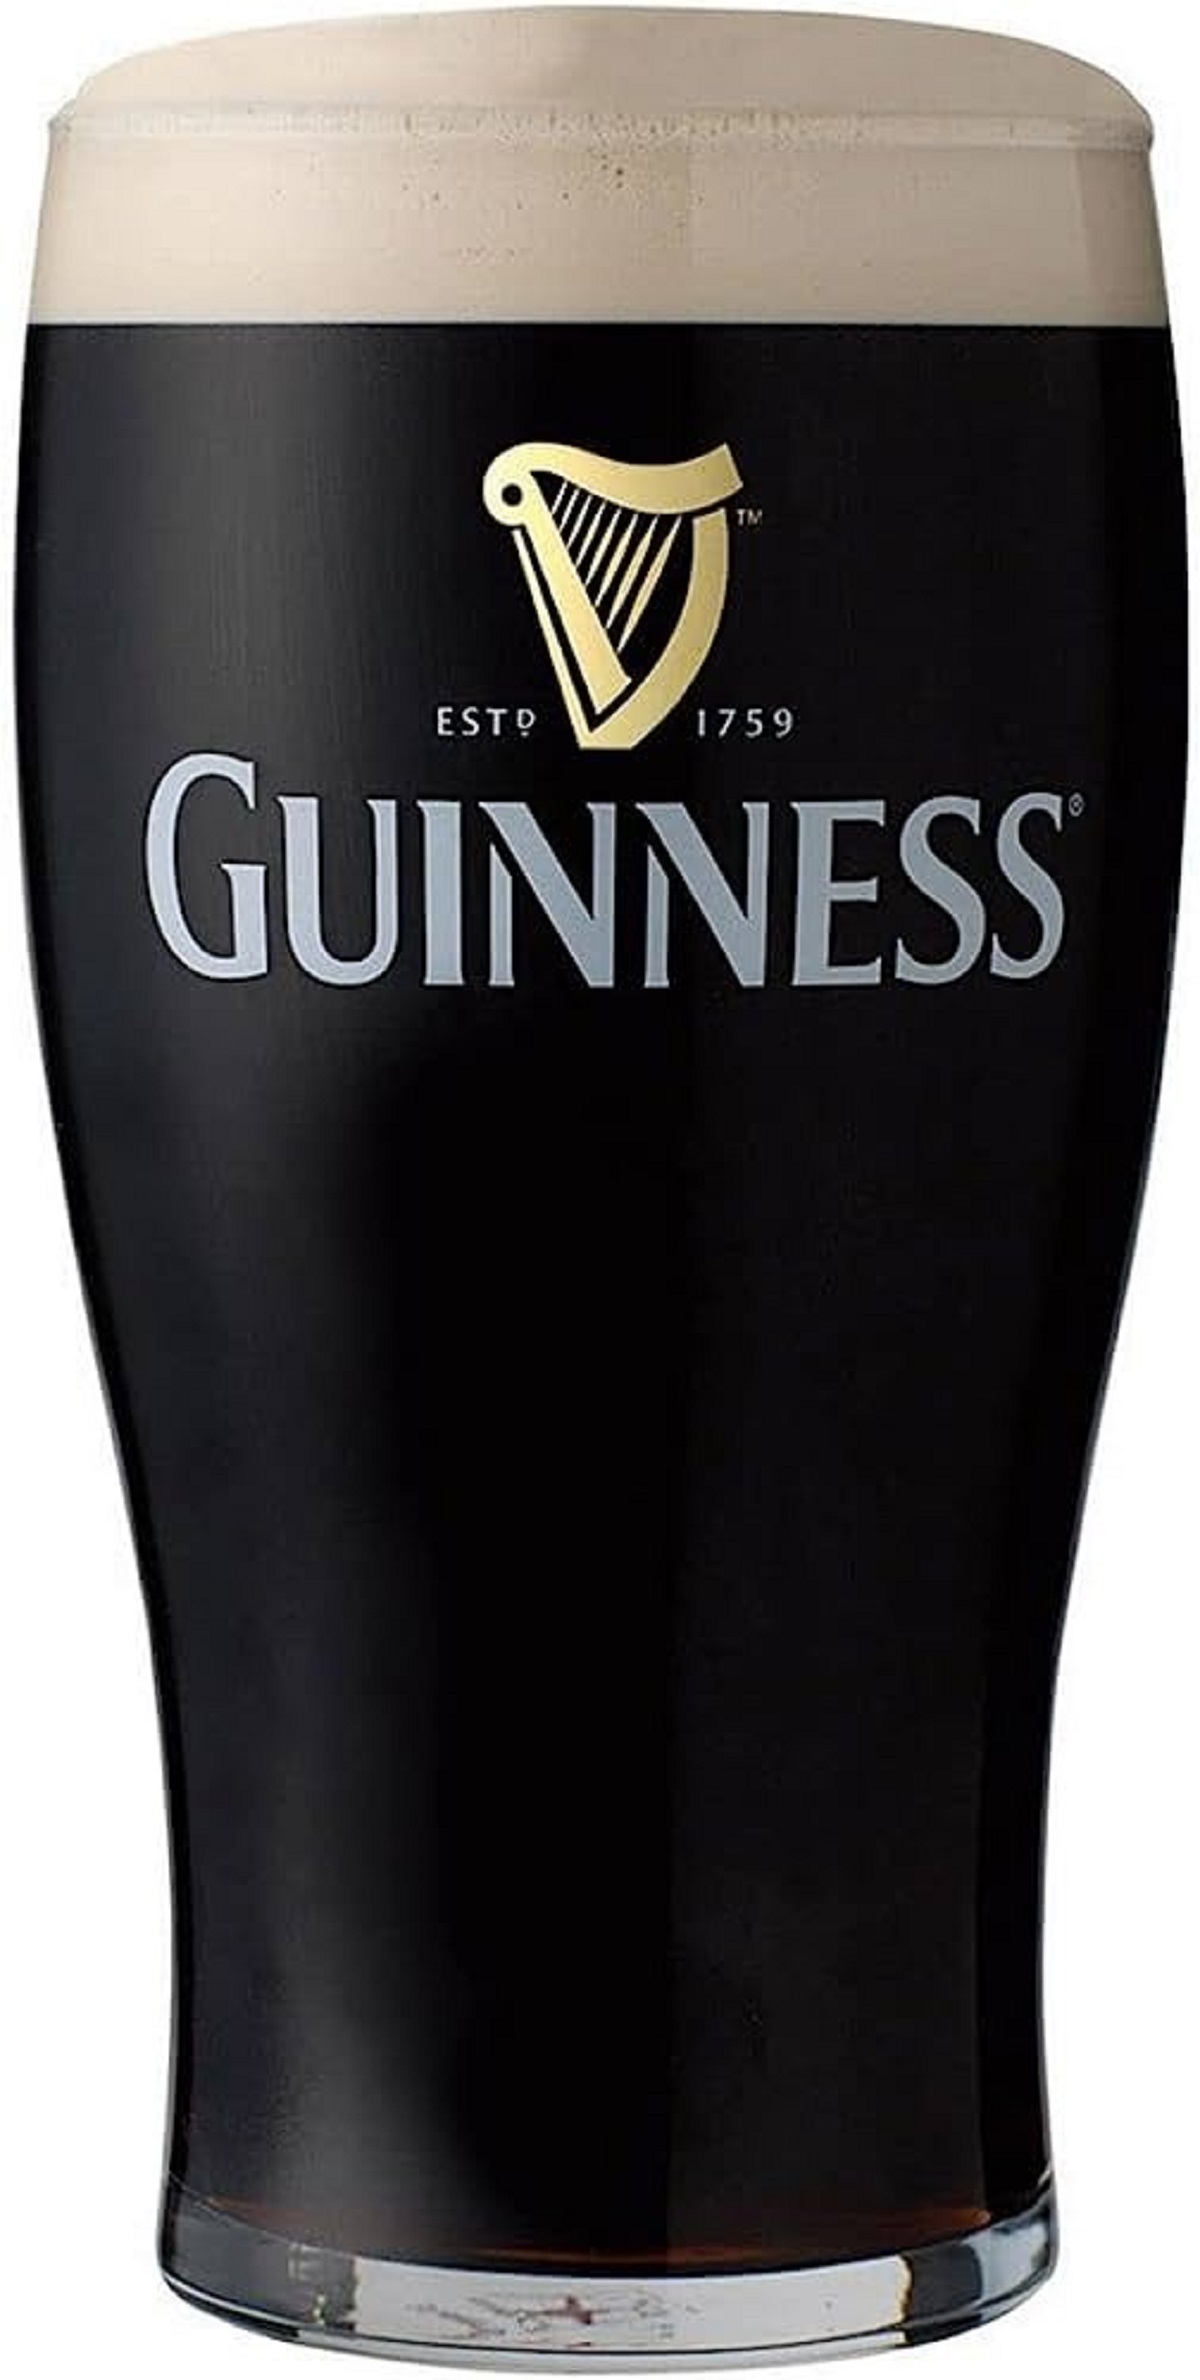 That the Guinness beer company is responsible for the Guinness book of world records